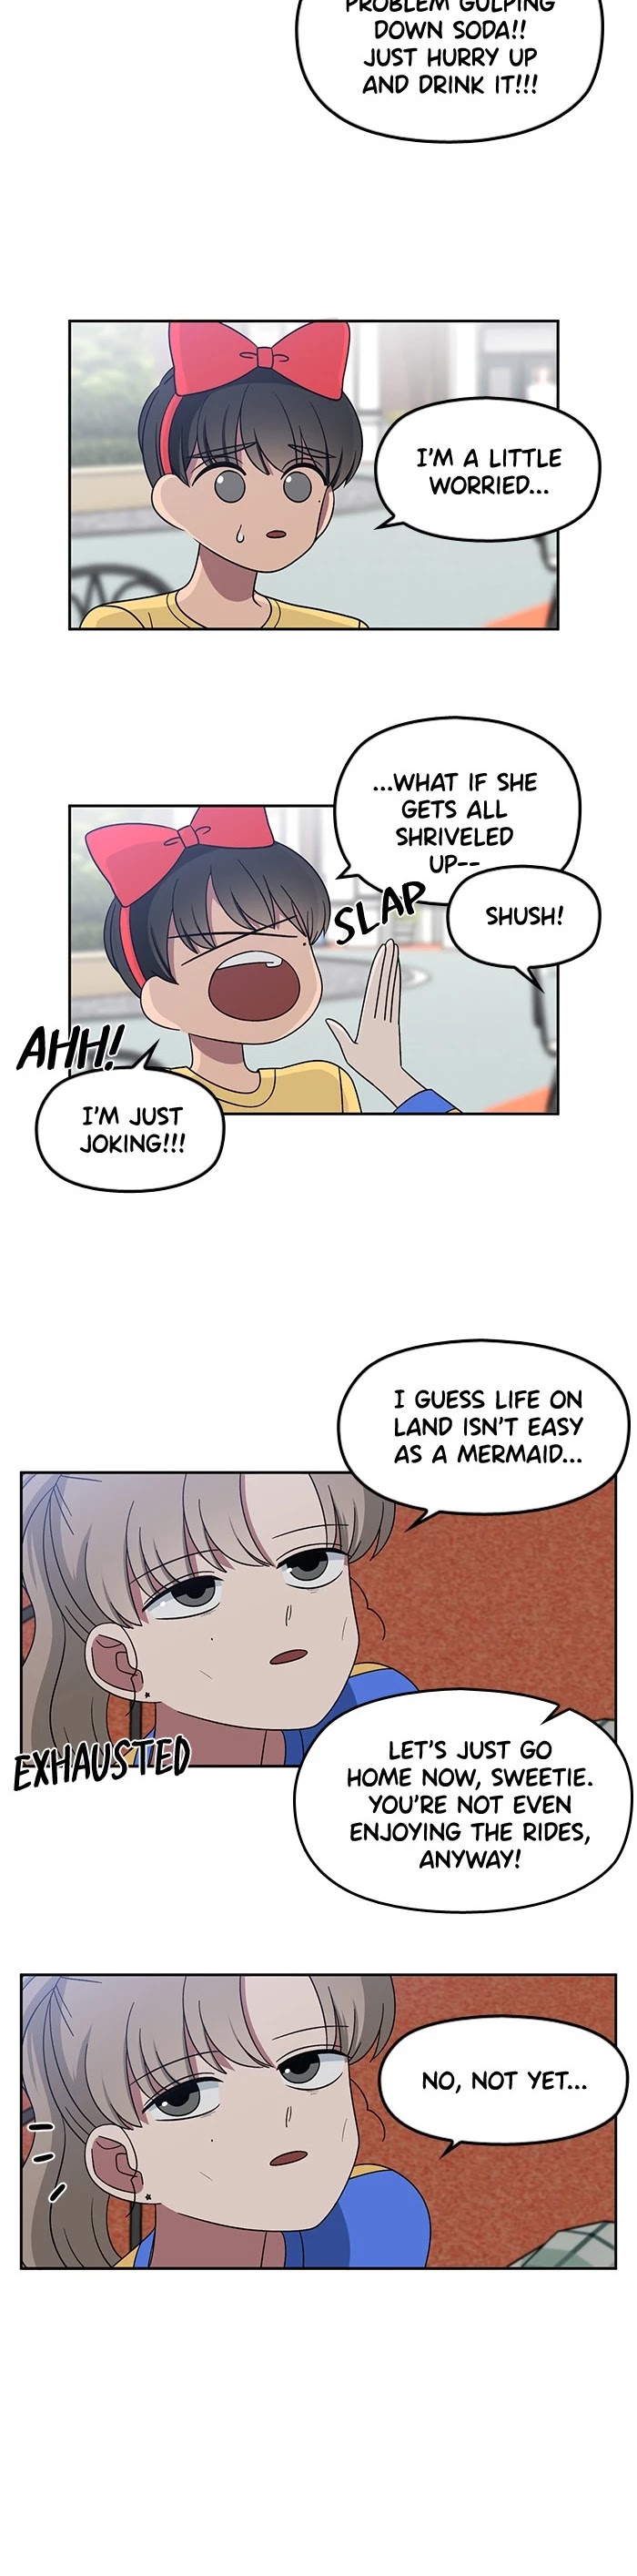 Swimming Lessons For A Mermaid - Page 3